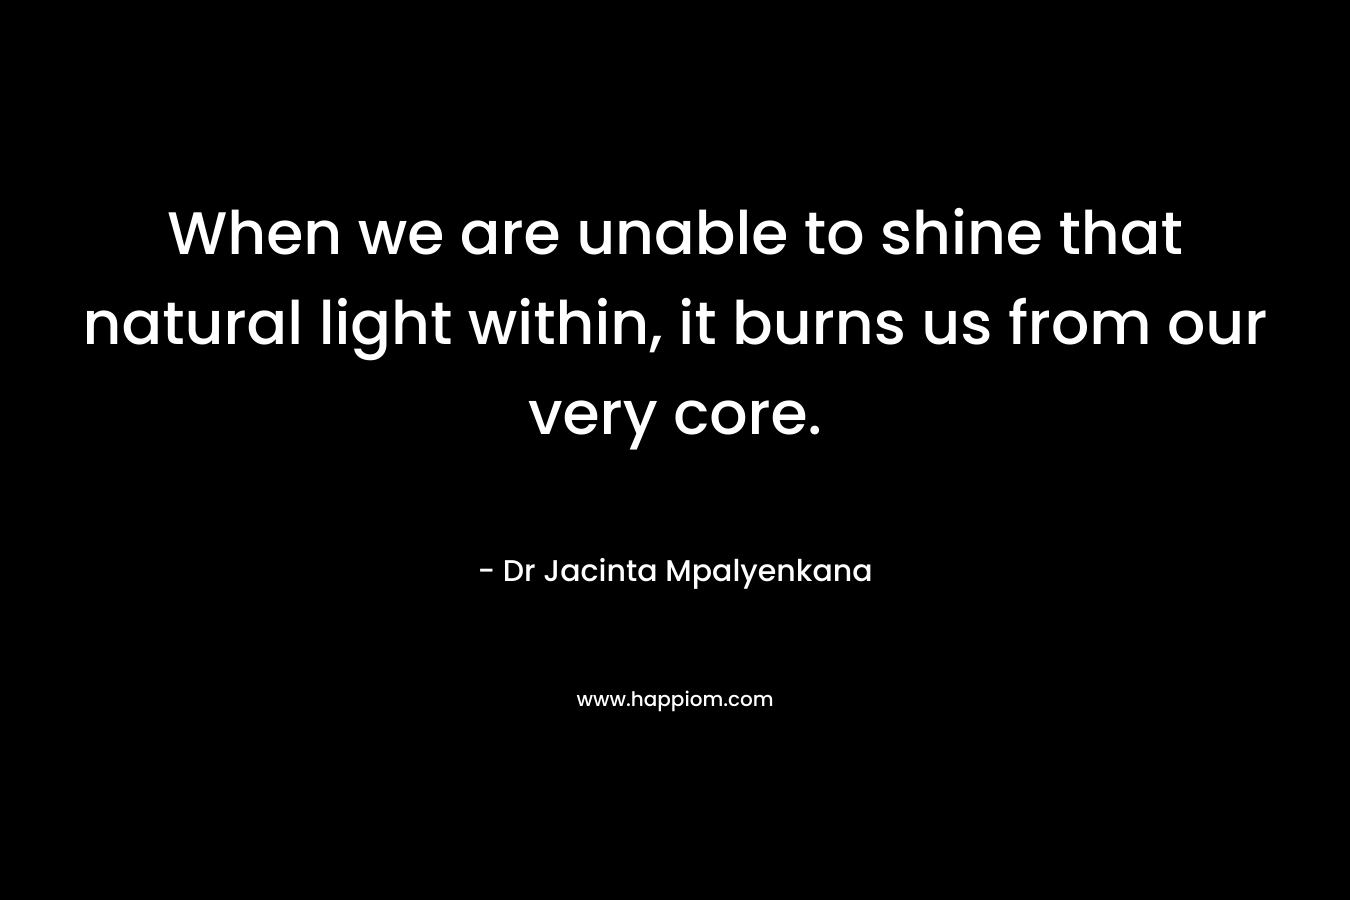 When we are unable to shine that natural light within, it burns us from our very core.